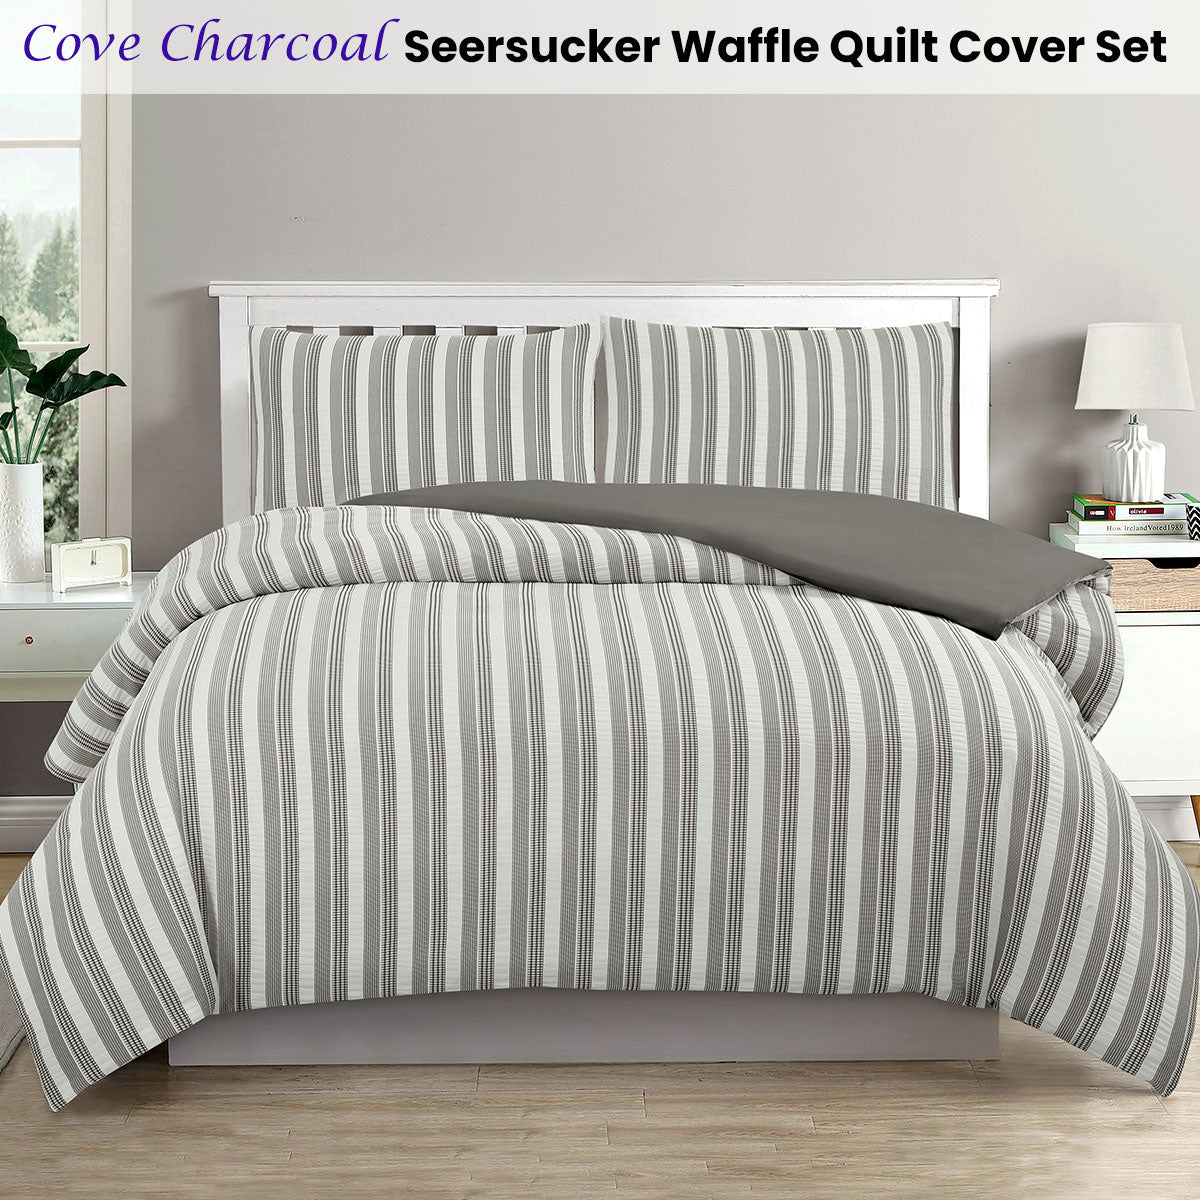 Ardor Cove Charcoal Seersucker Waffle King Size Quilt Cover Set